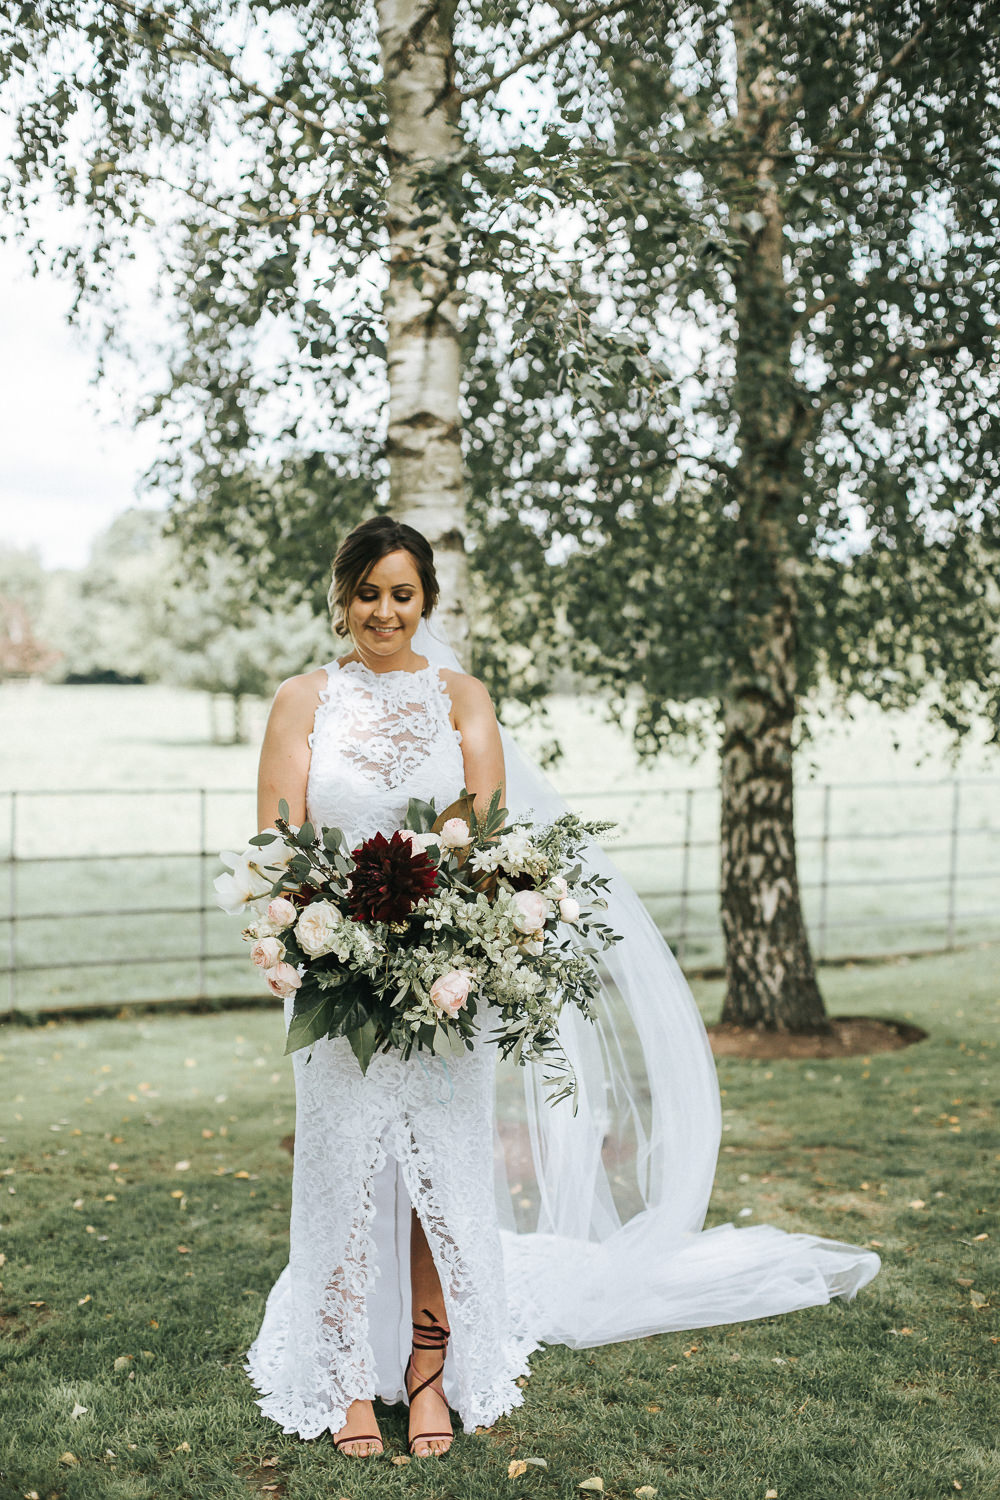 The bride was wearing a lace sheath dress with an illusion halter neckline and a front slit